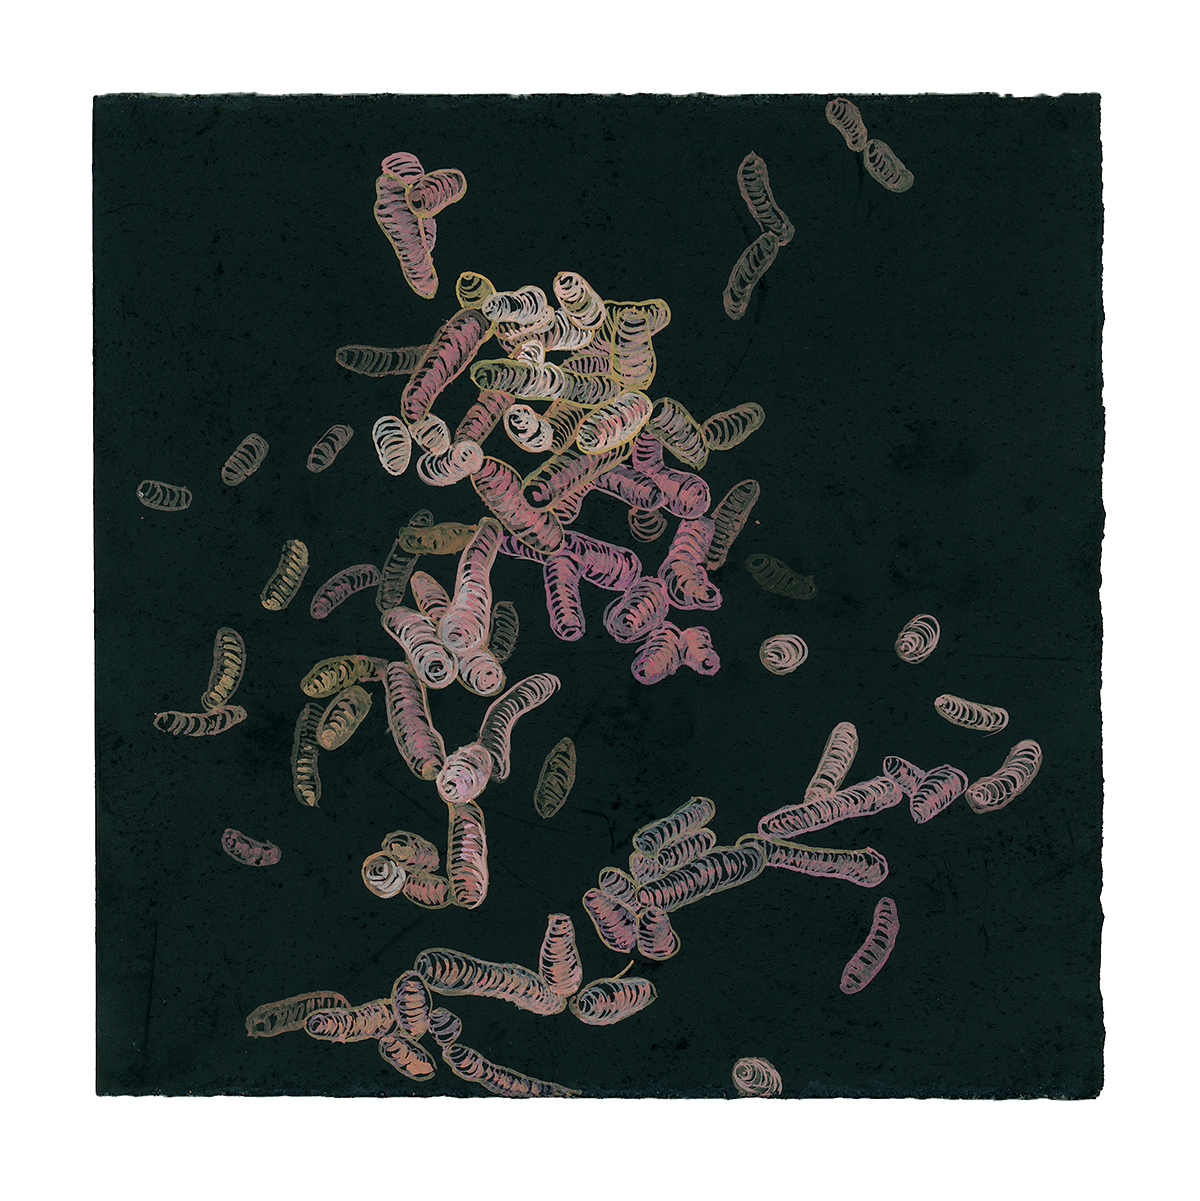 Salmonella, 2007-08, pastel, gouache and ink on paper, 6 x 6 inches